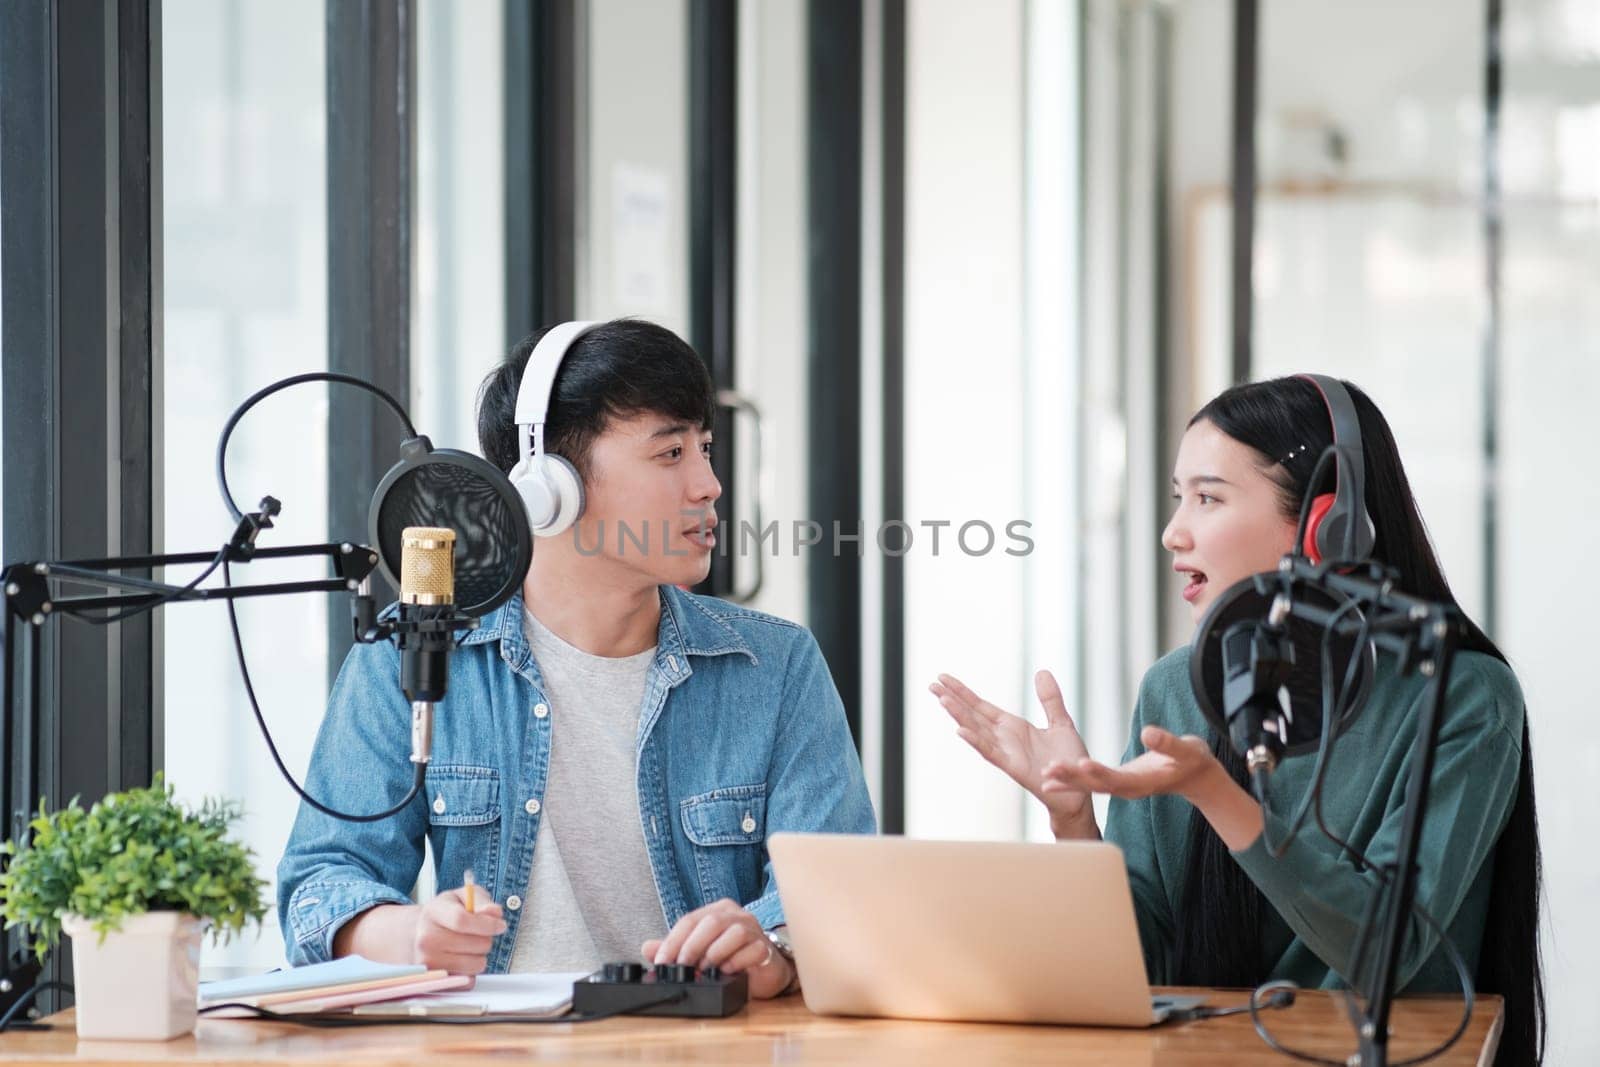 Two people are talking on a microphone. One of them is wearing headphones. The other person is looking at the camera